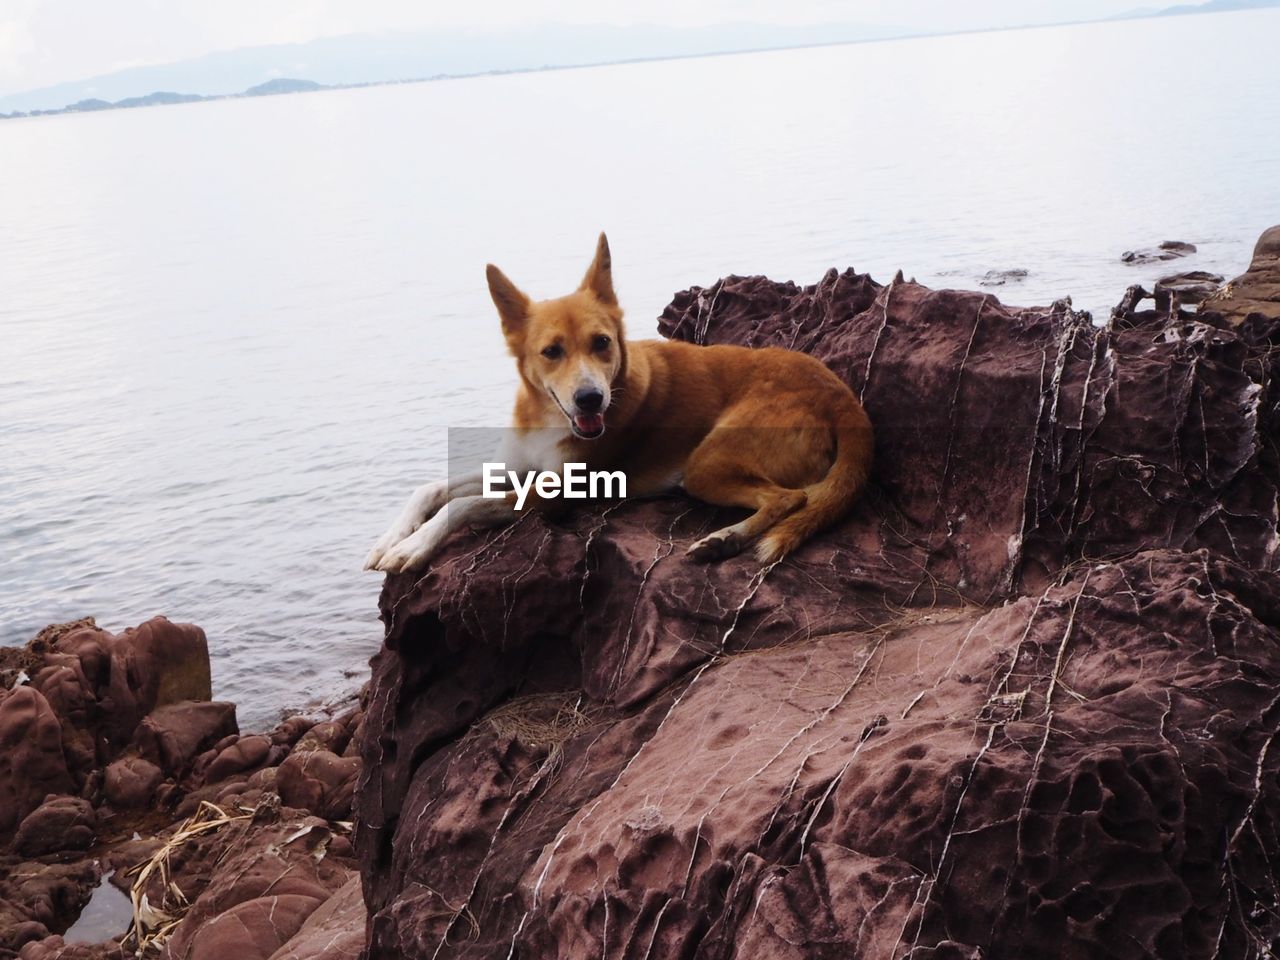 PORTRAIT OF A DOG ON ROCK BY SEA